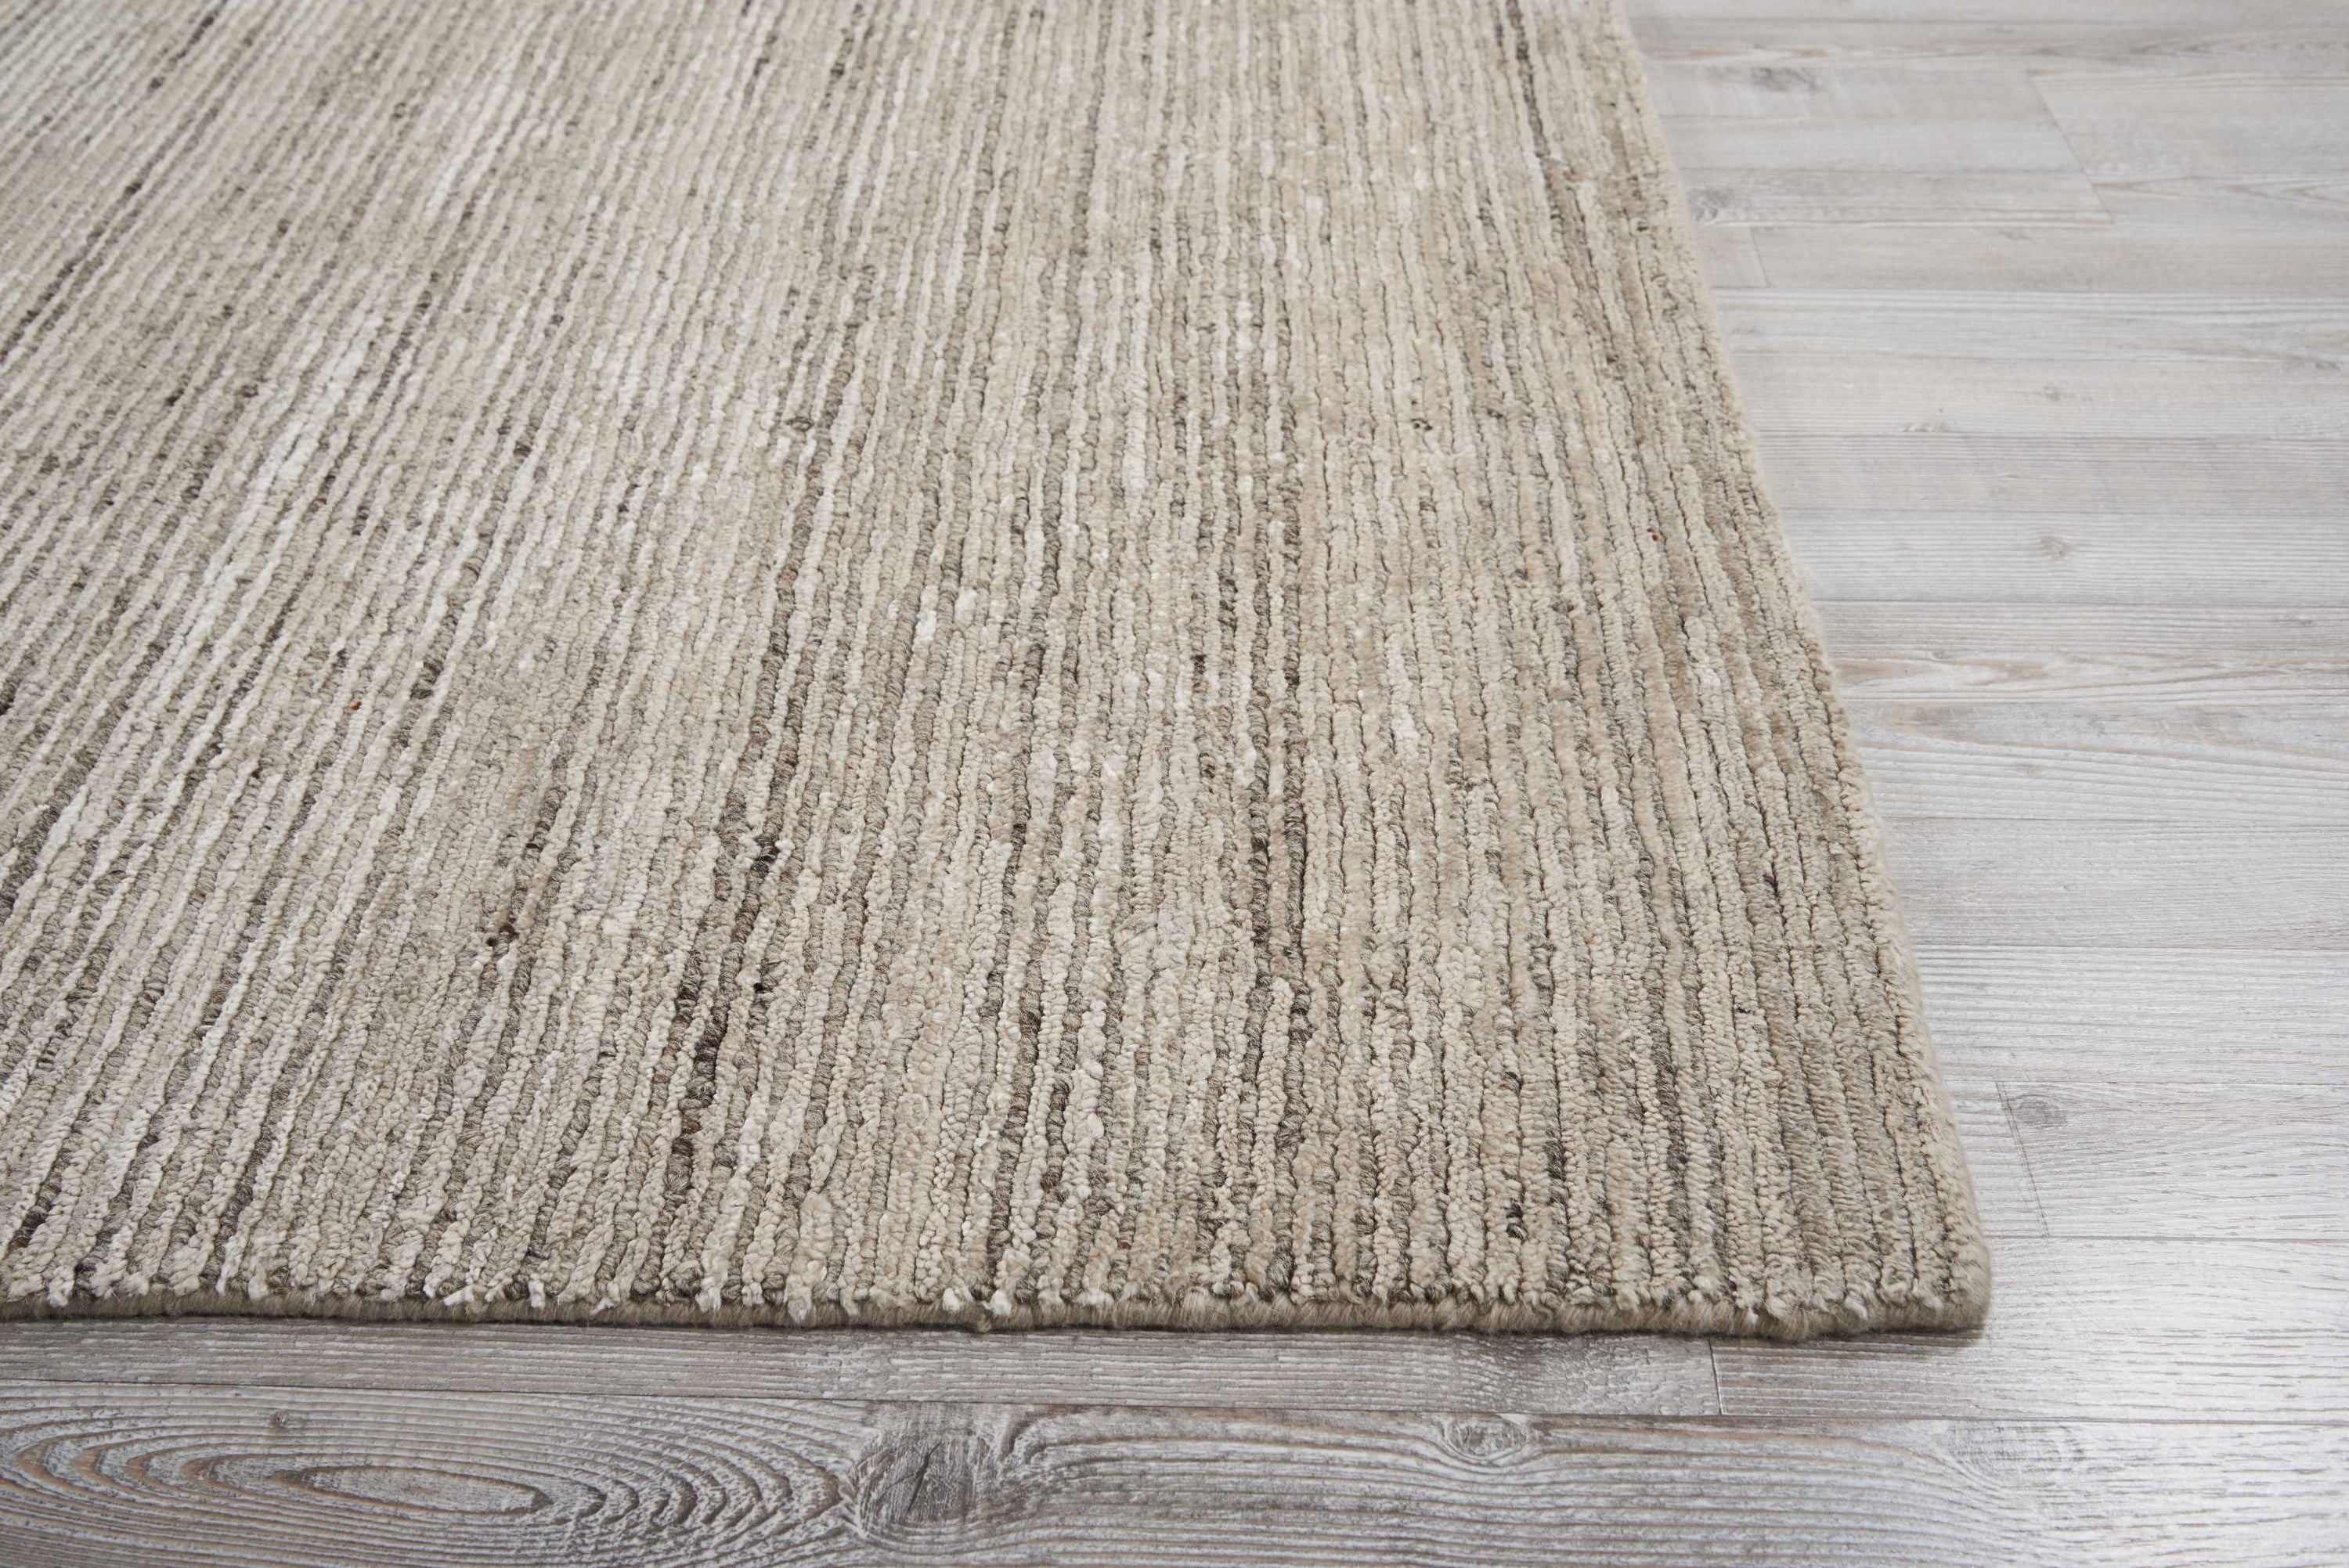 Section of textured area rug on wood laminate floor